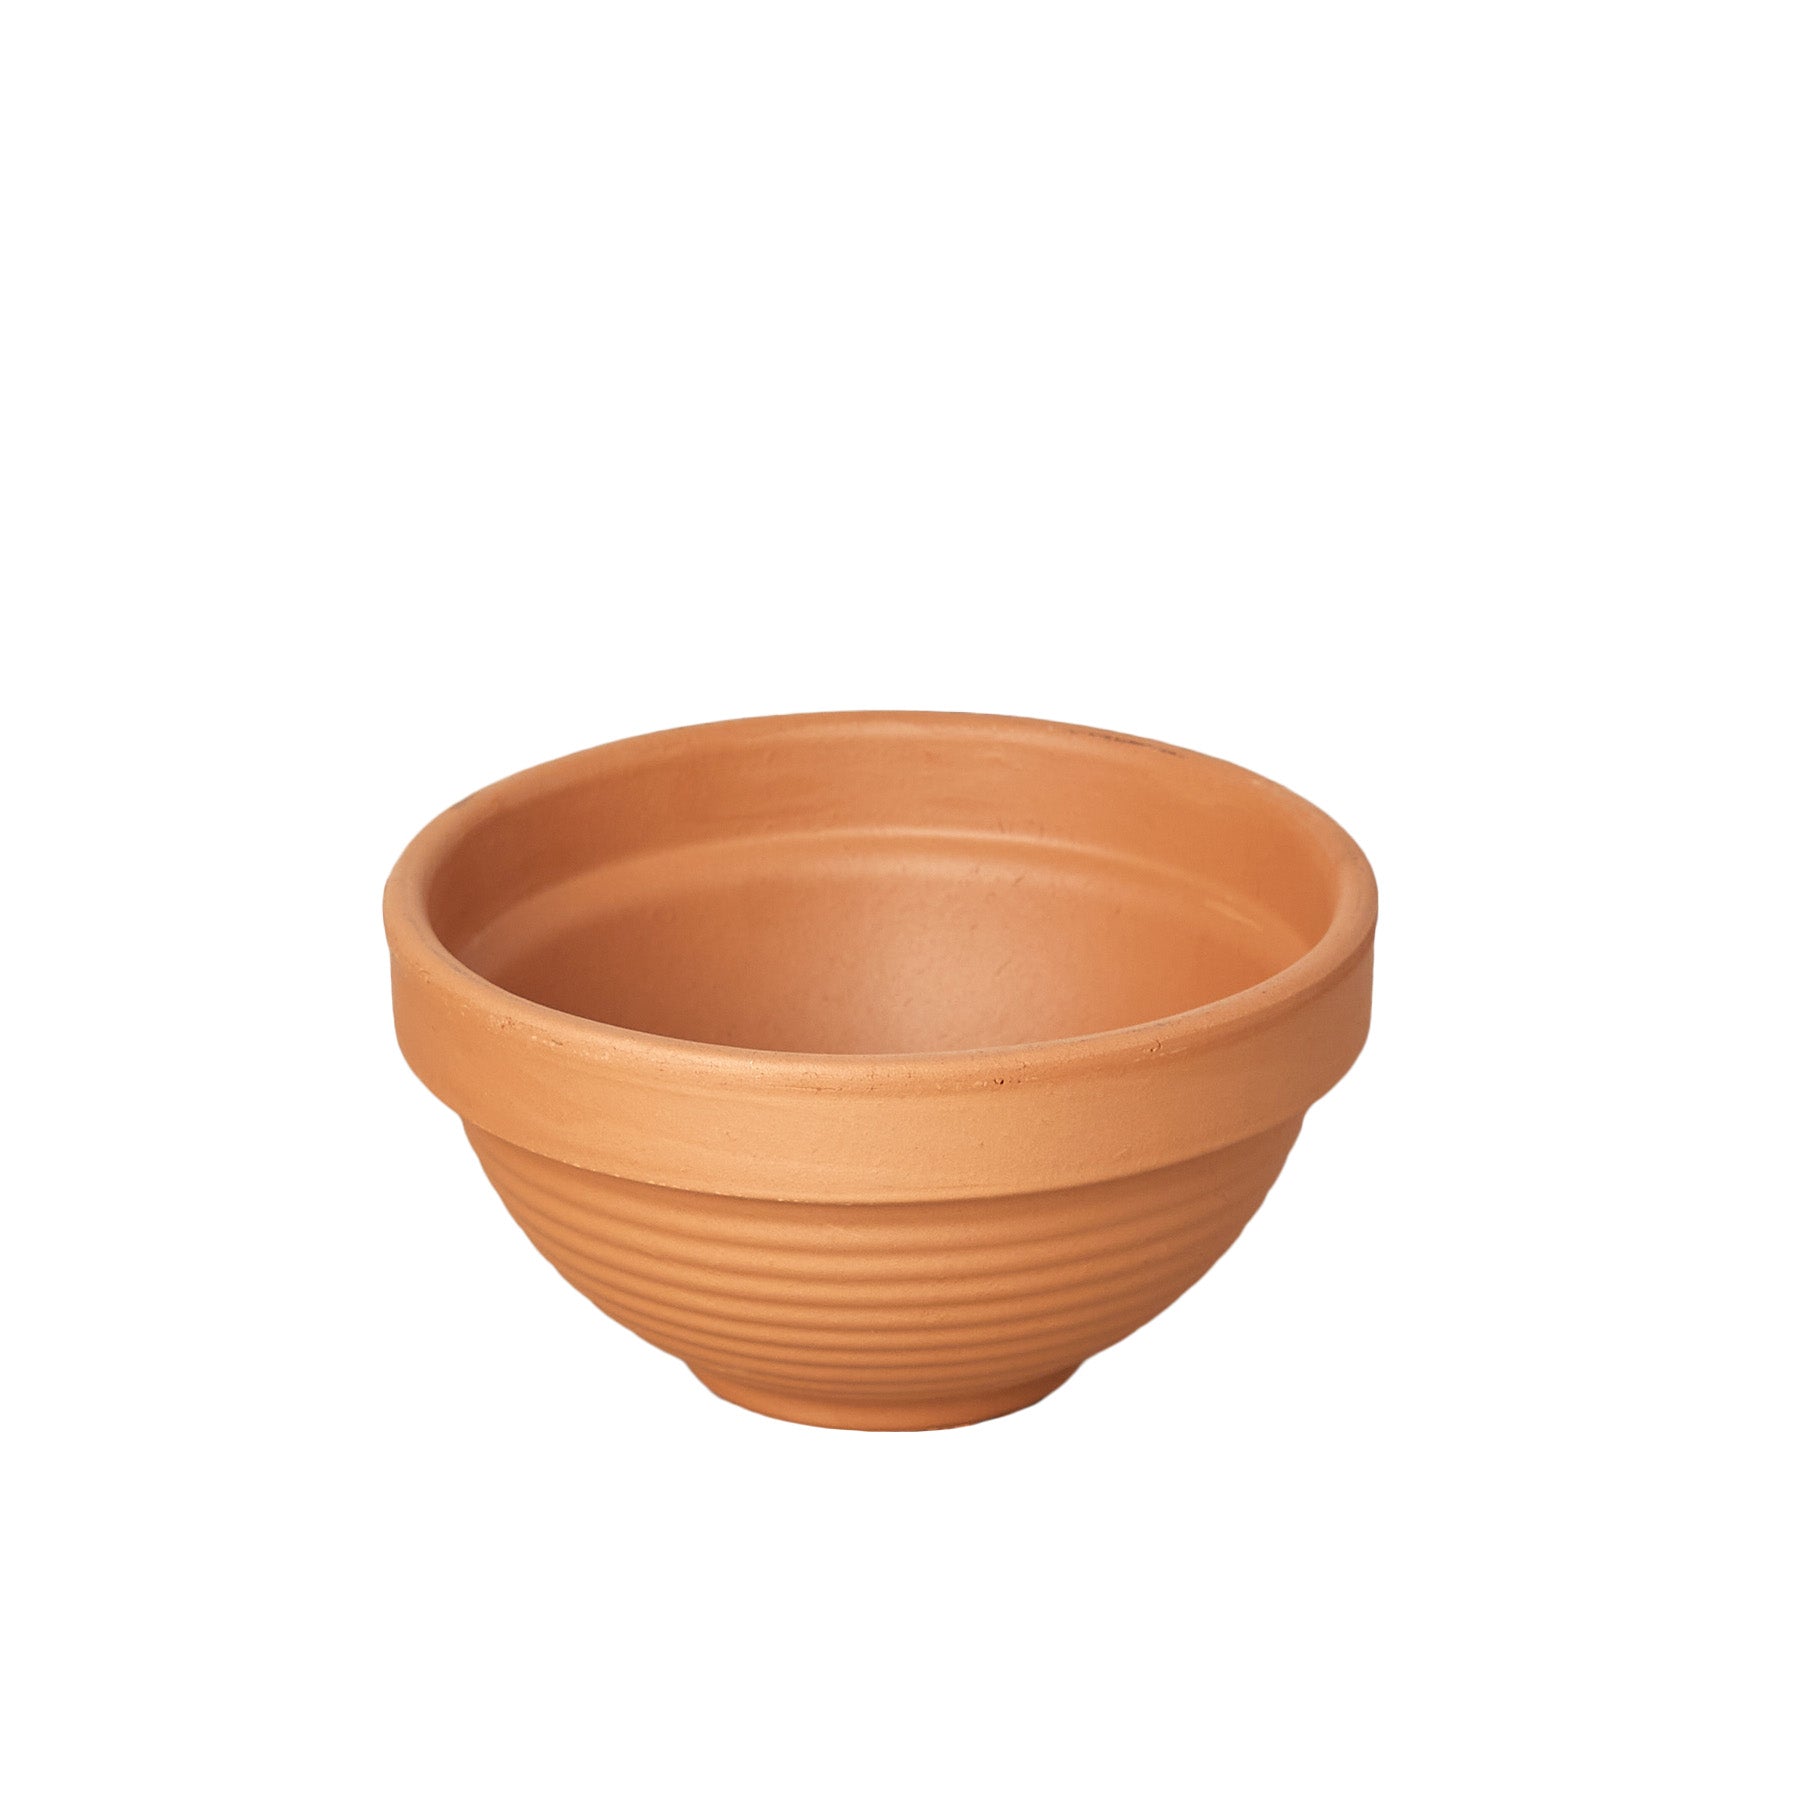 A small clay bowl amidst a serene white background.